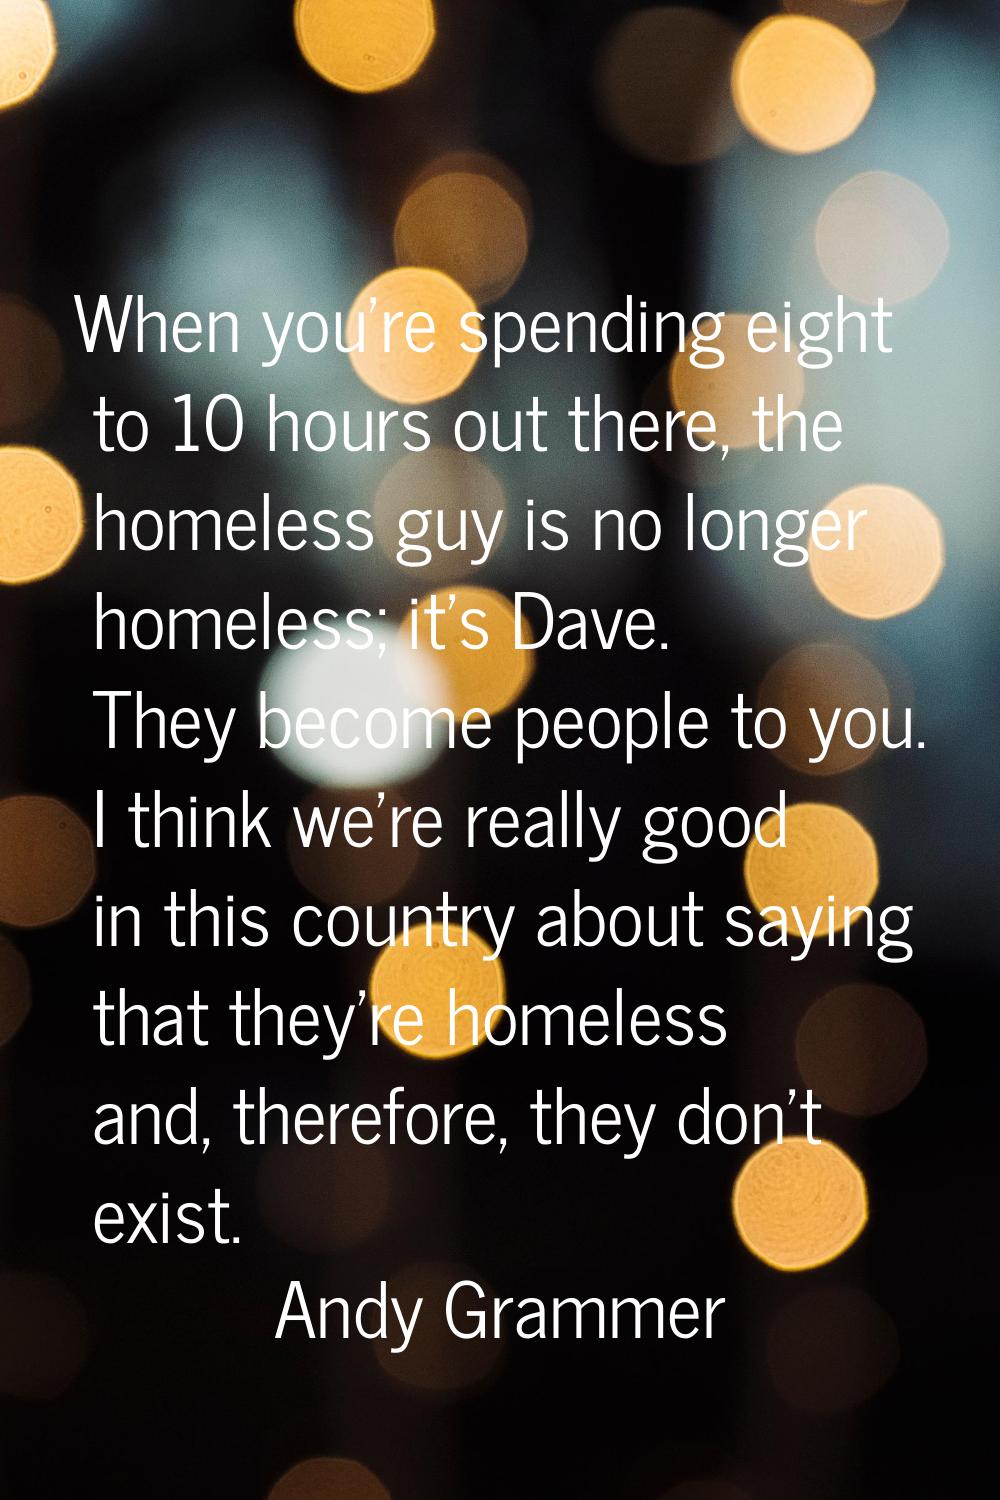 When you're spending eight to 10 hours out there, the homeless guy is no longer homeless; it's Dave